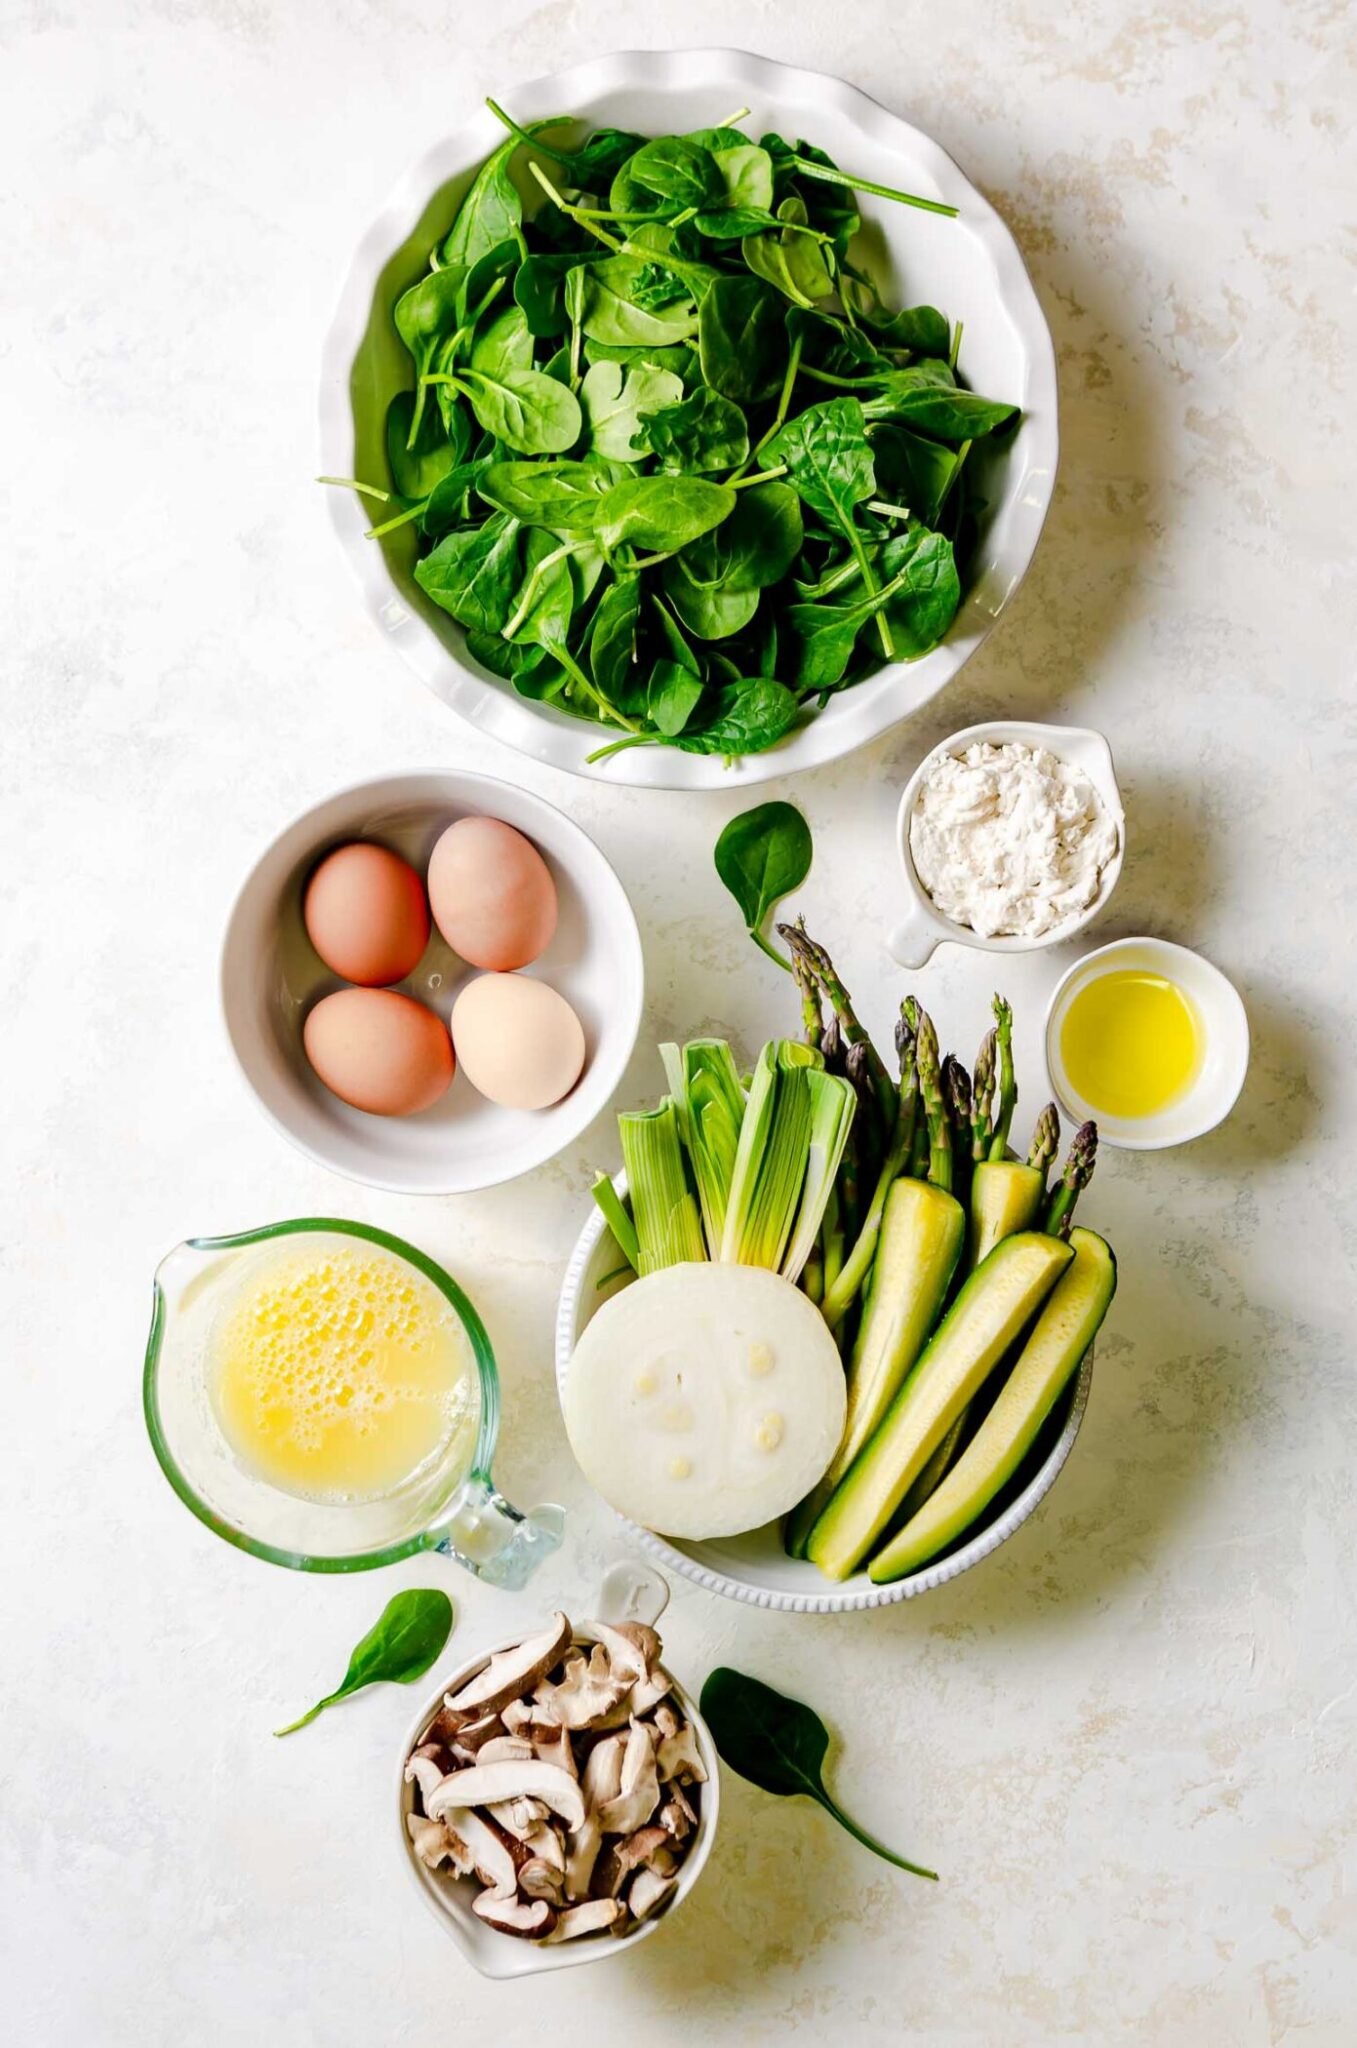 Ingredients for a green vegetable frittata including baby spinach, eggs, zucchini, onion, leeks, asparagus, ricotta, shiitake mushrooms.